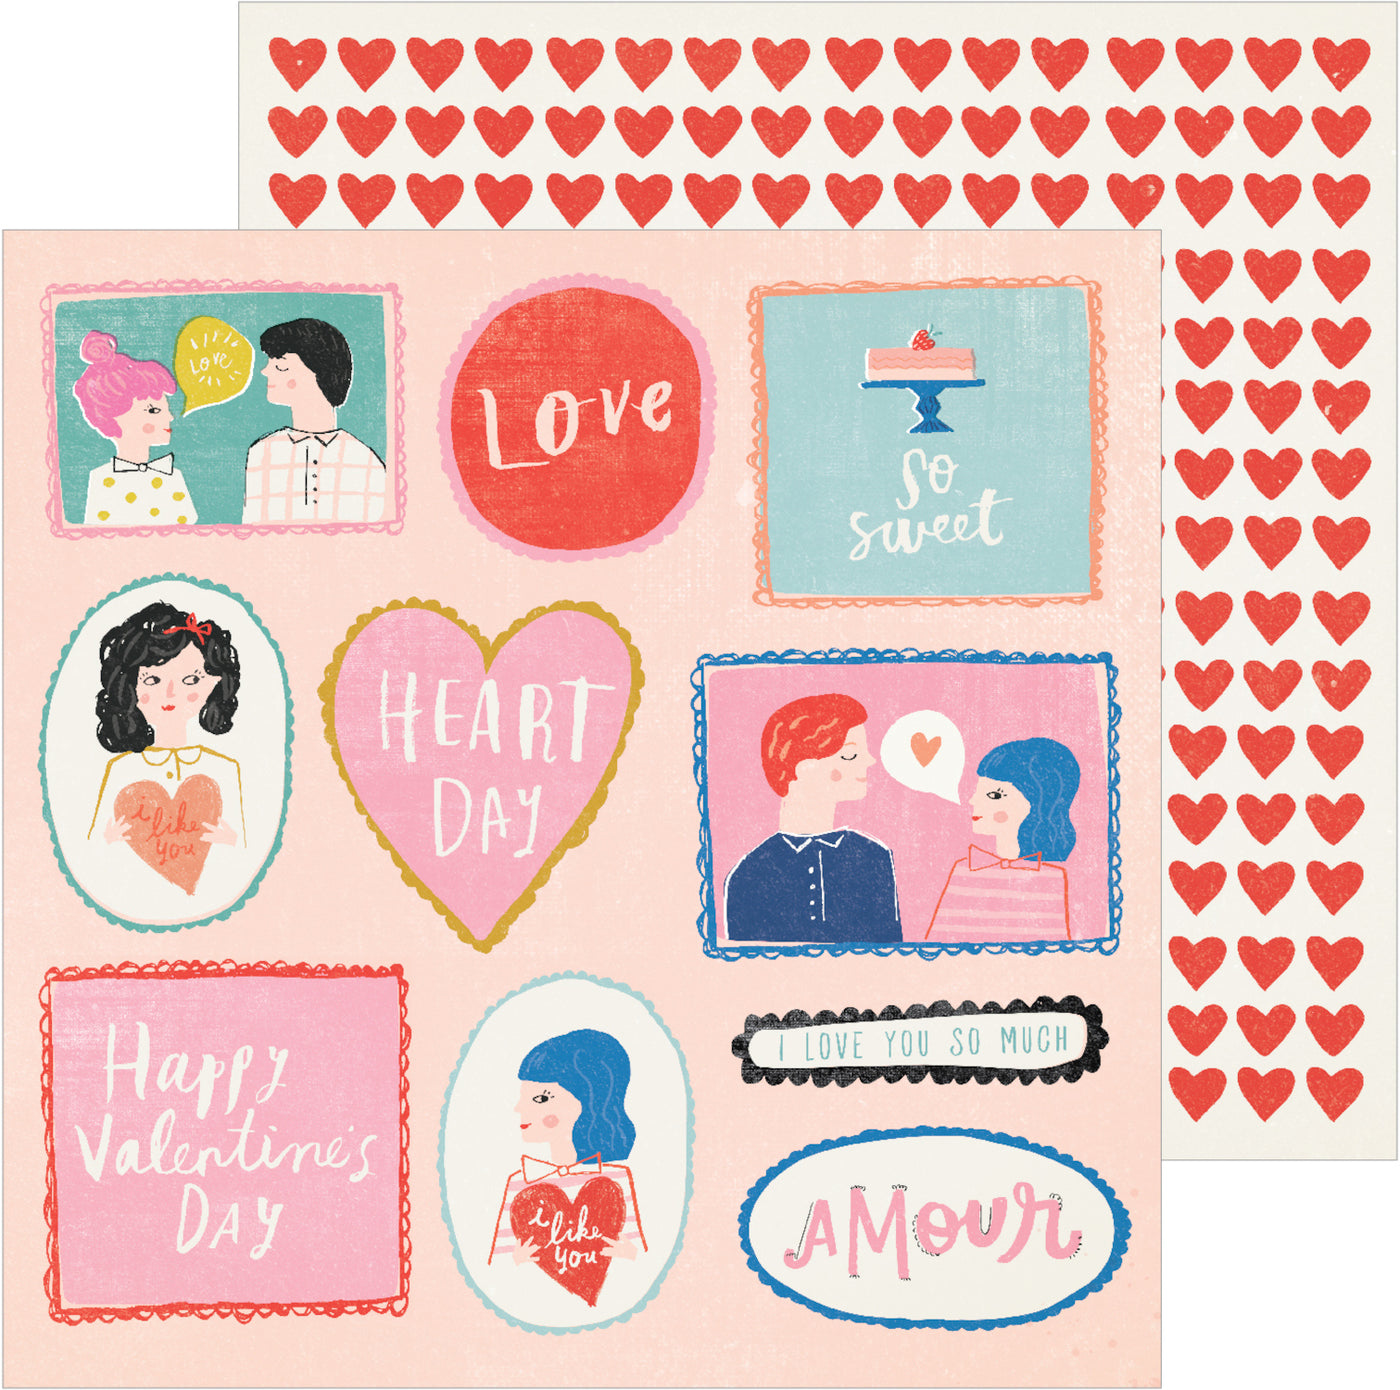 12x12 double-sided patterned cardstock with love messages on one side and rows of red hearts on the reverse - Crate Paper